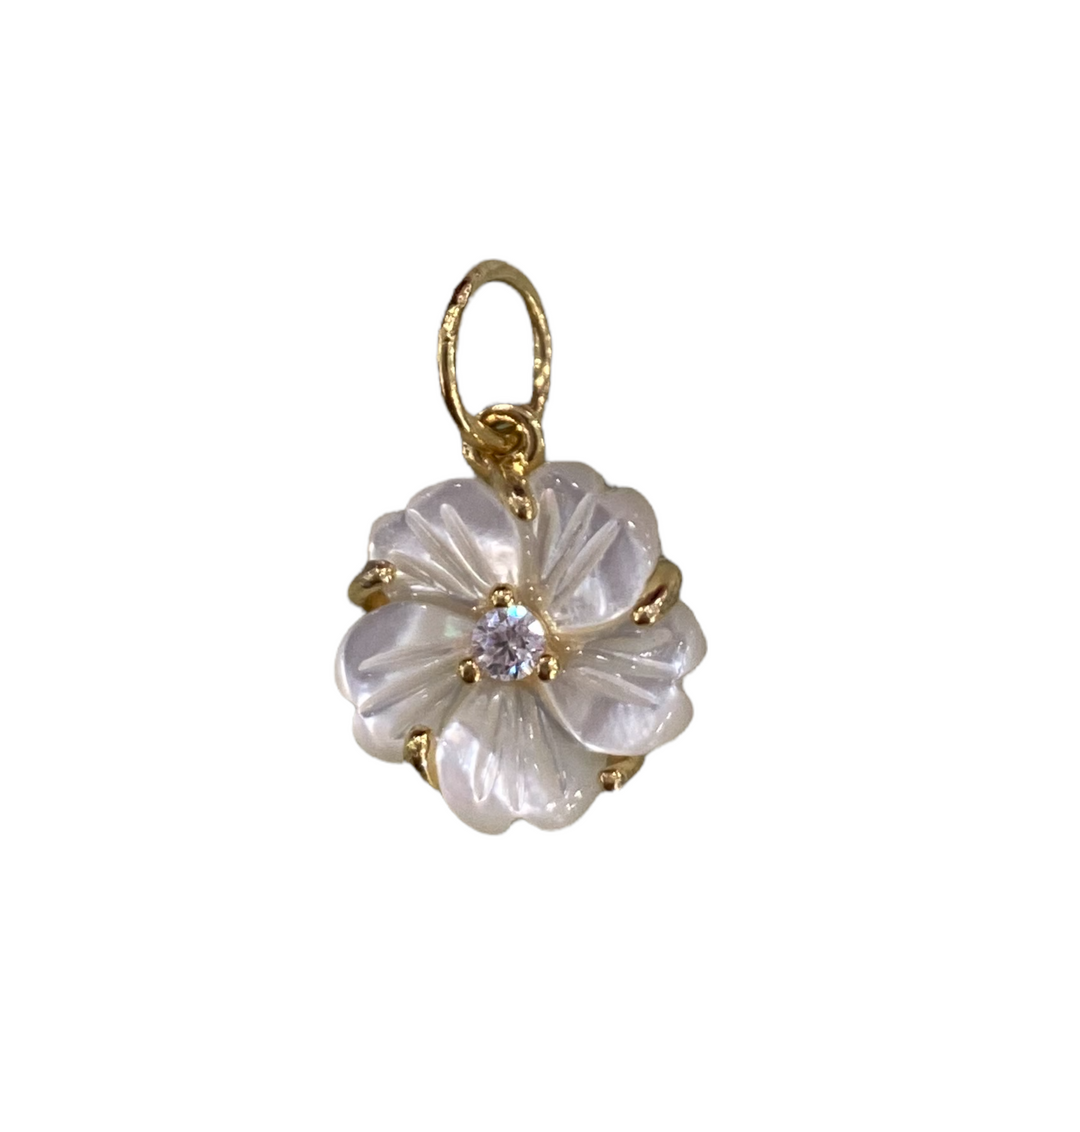 GOLD MOTHER OF PEARL FLOWER CHARM